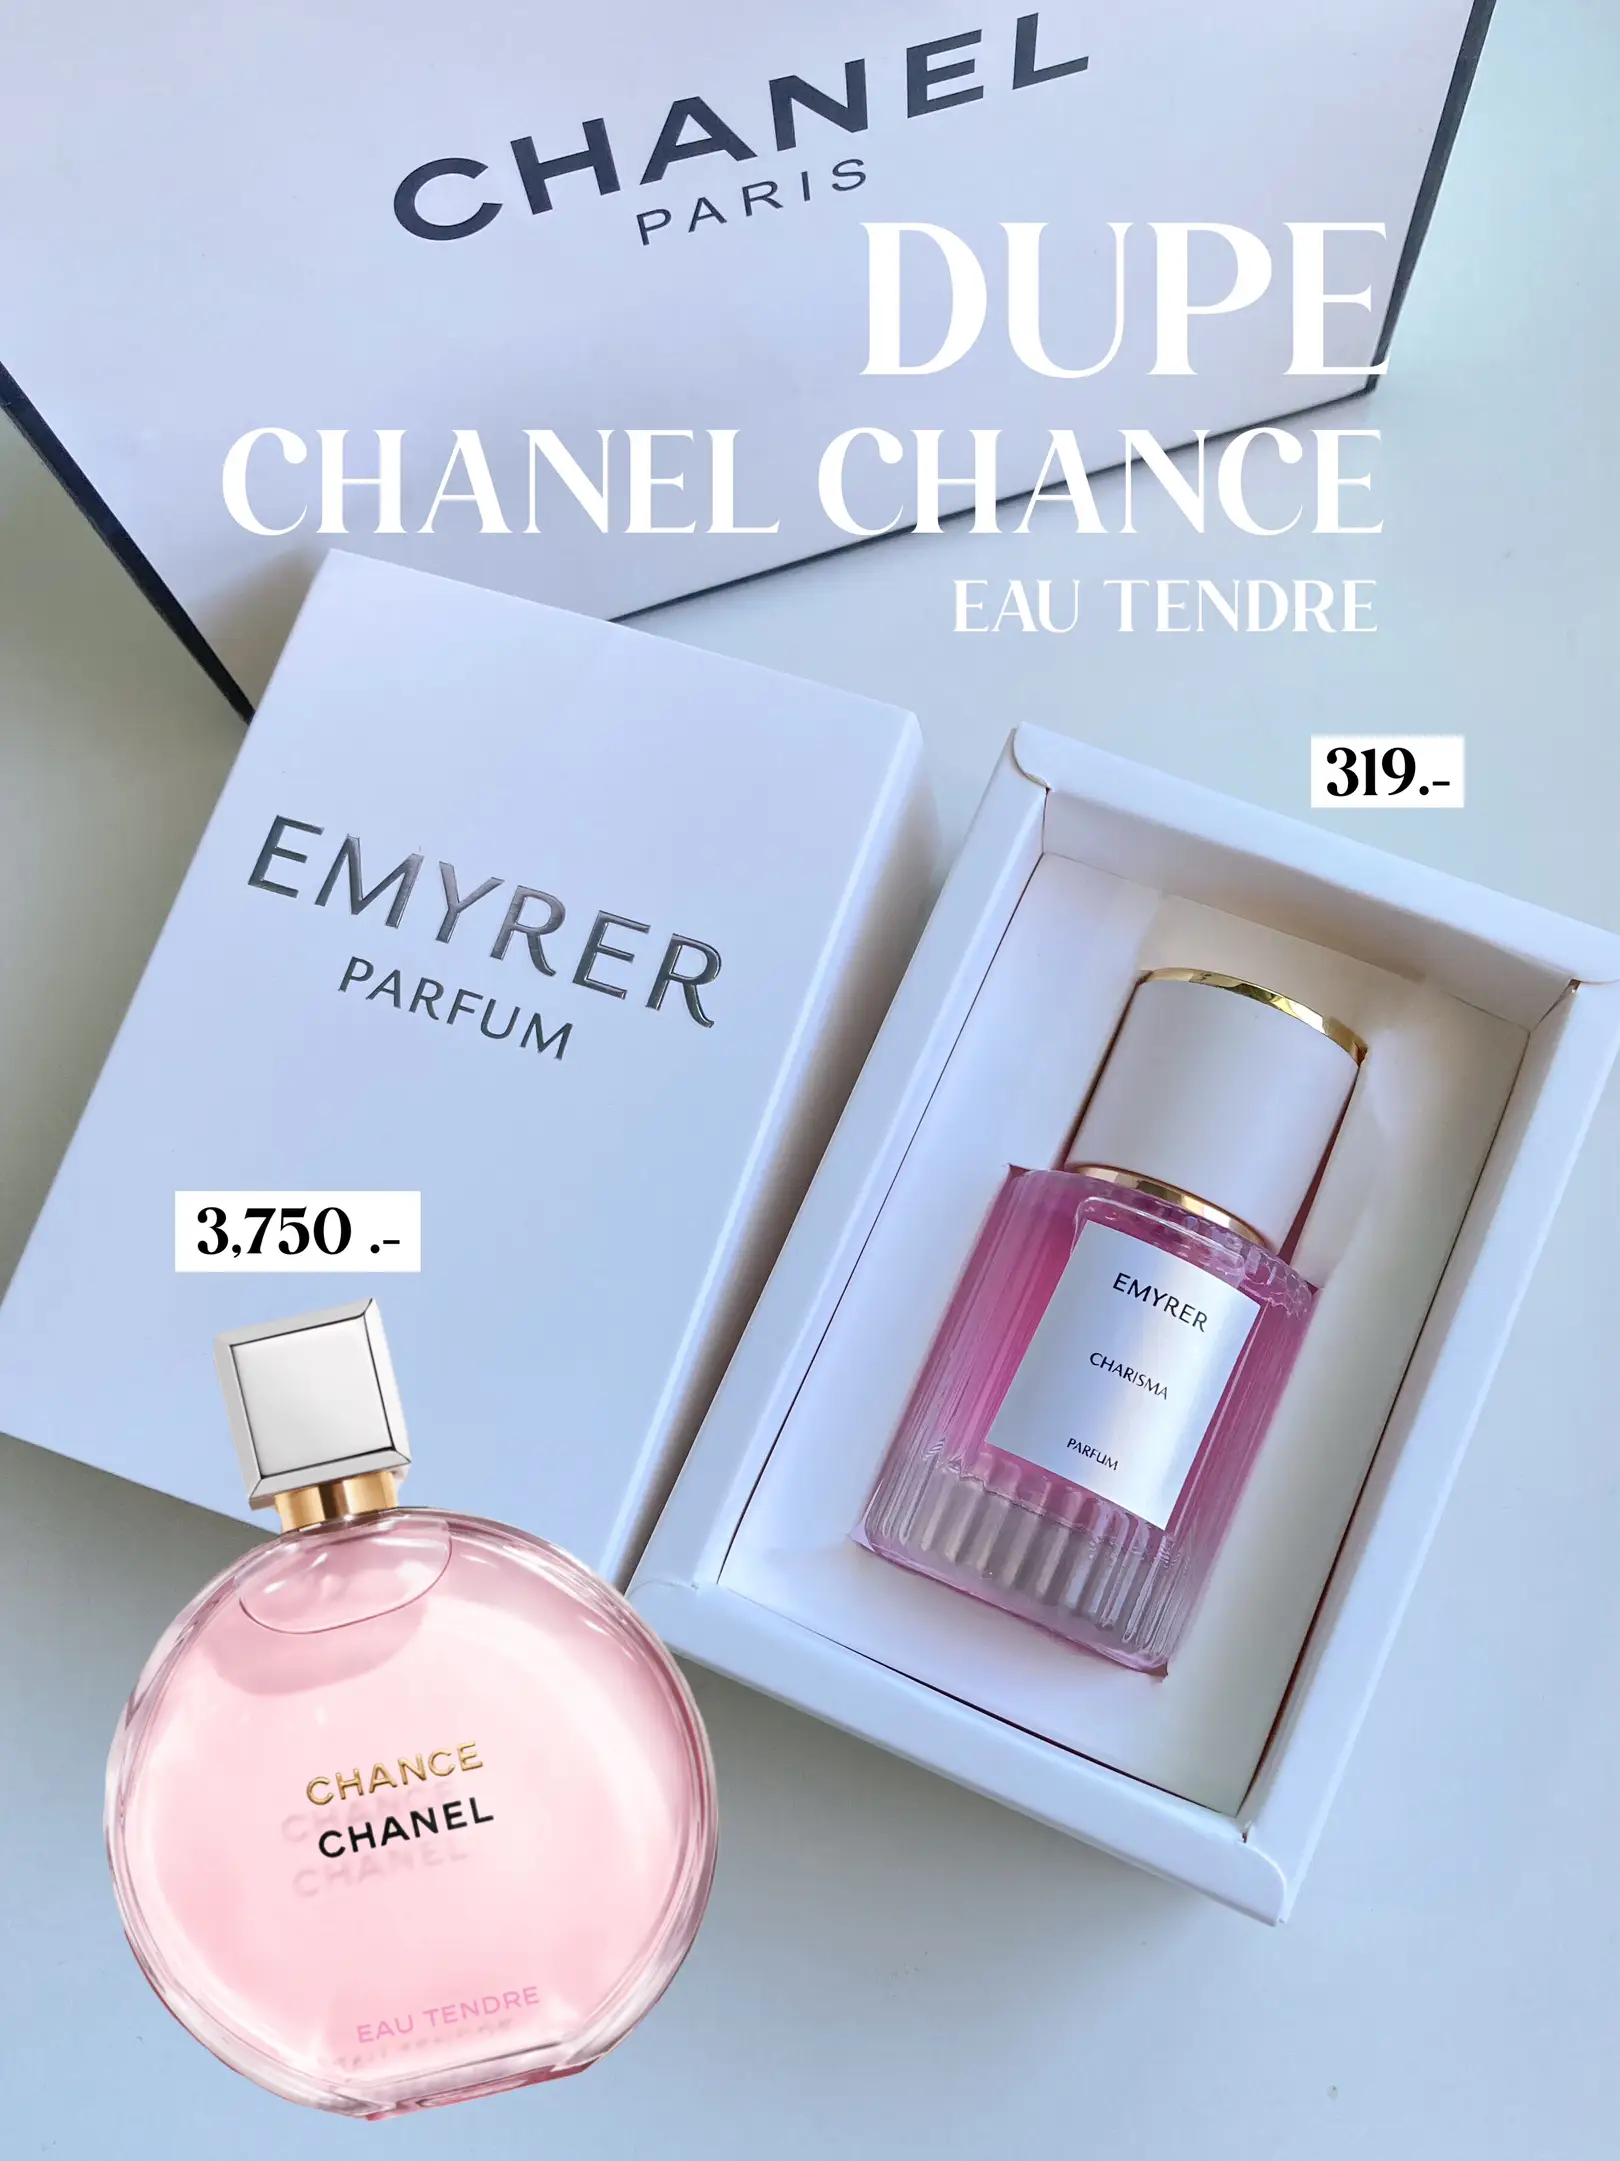 Dupe Chanel Fragrance and Hundred Fragrance Scent Like A Lot!!, Gallery  posted by Beautysweeties.